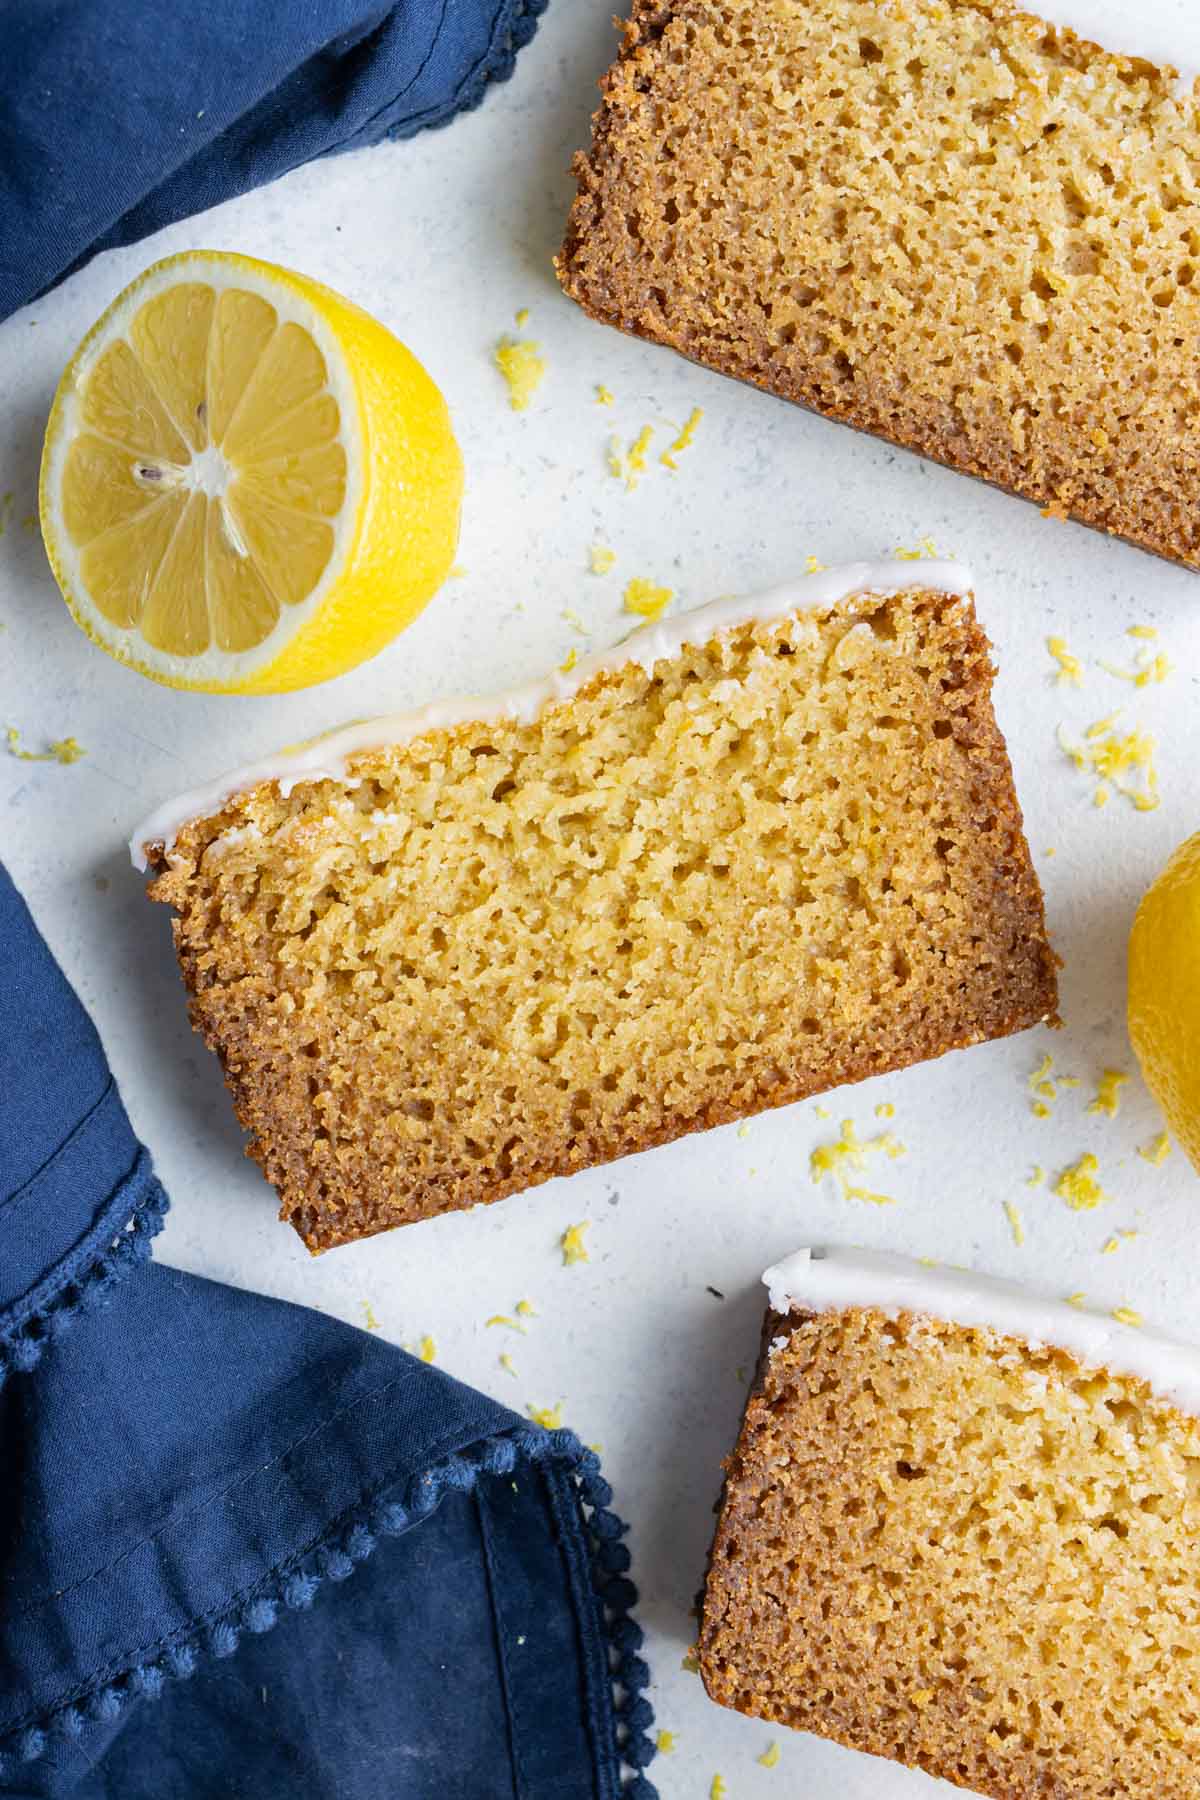 Slices of gluten-free lemon loaf are shown on the counter.